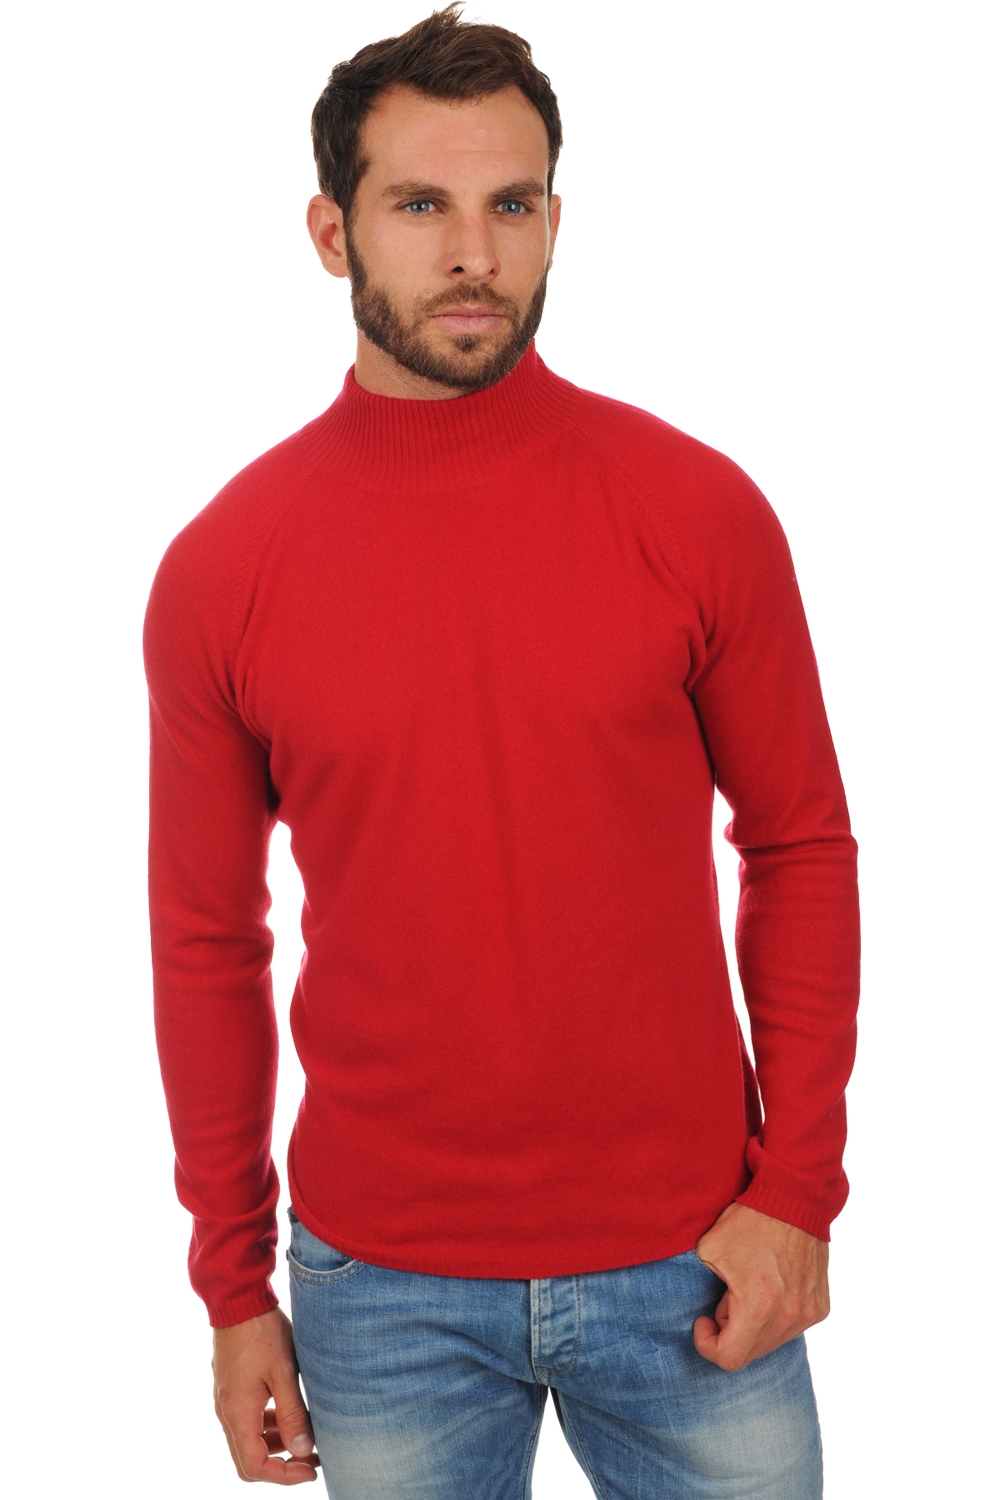 Cashmere men roll neck frederic blood red xl